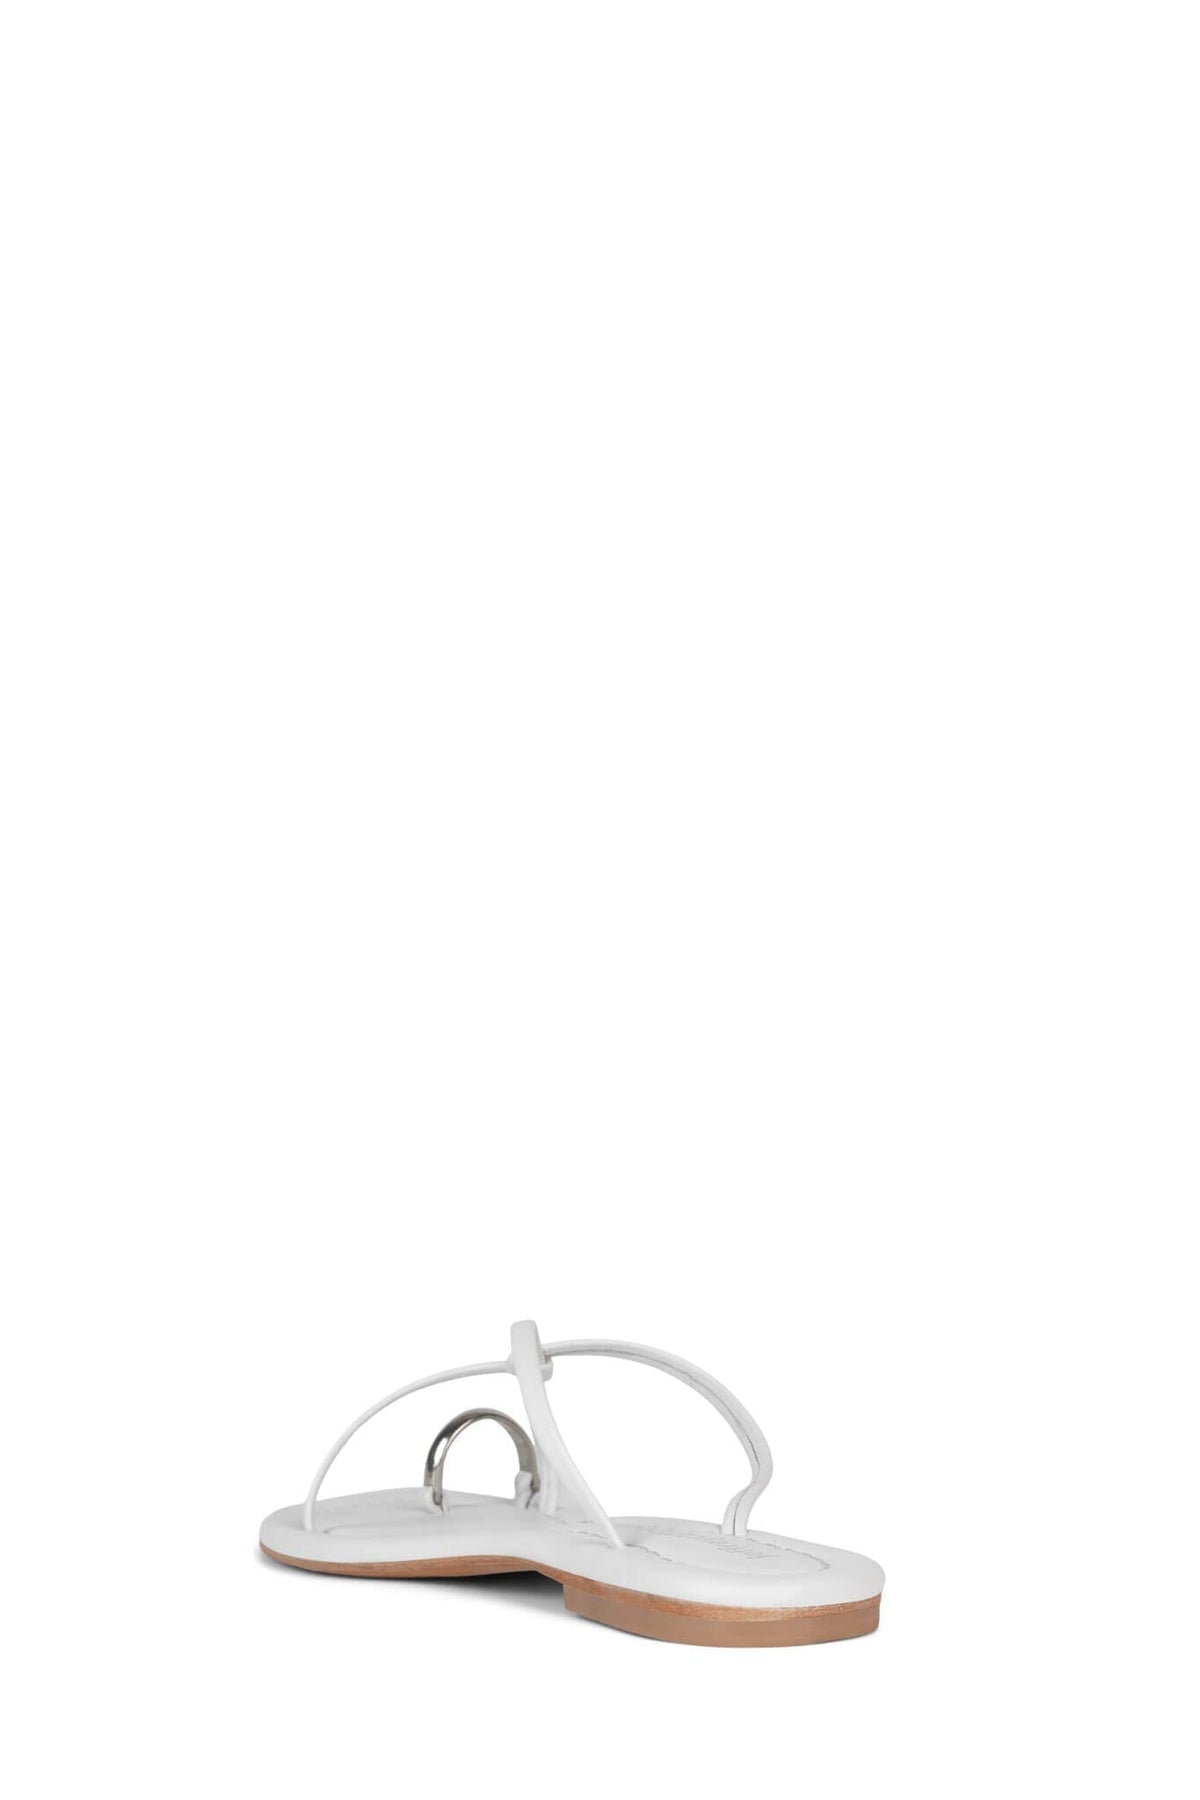 PACIFICO Jeffrey Campbell Flat Sandals White Silver